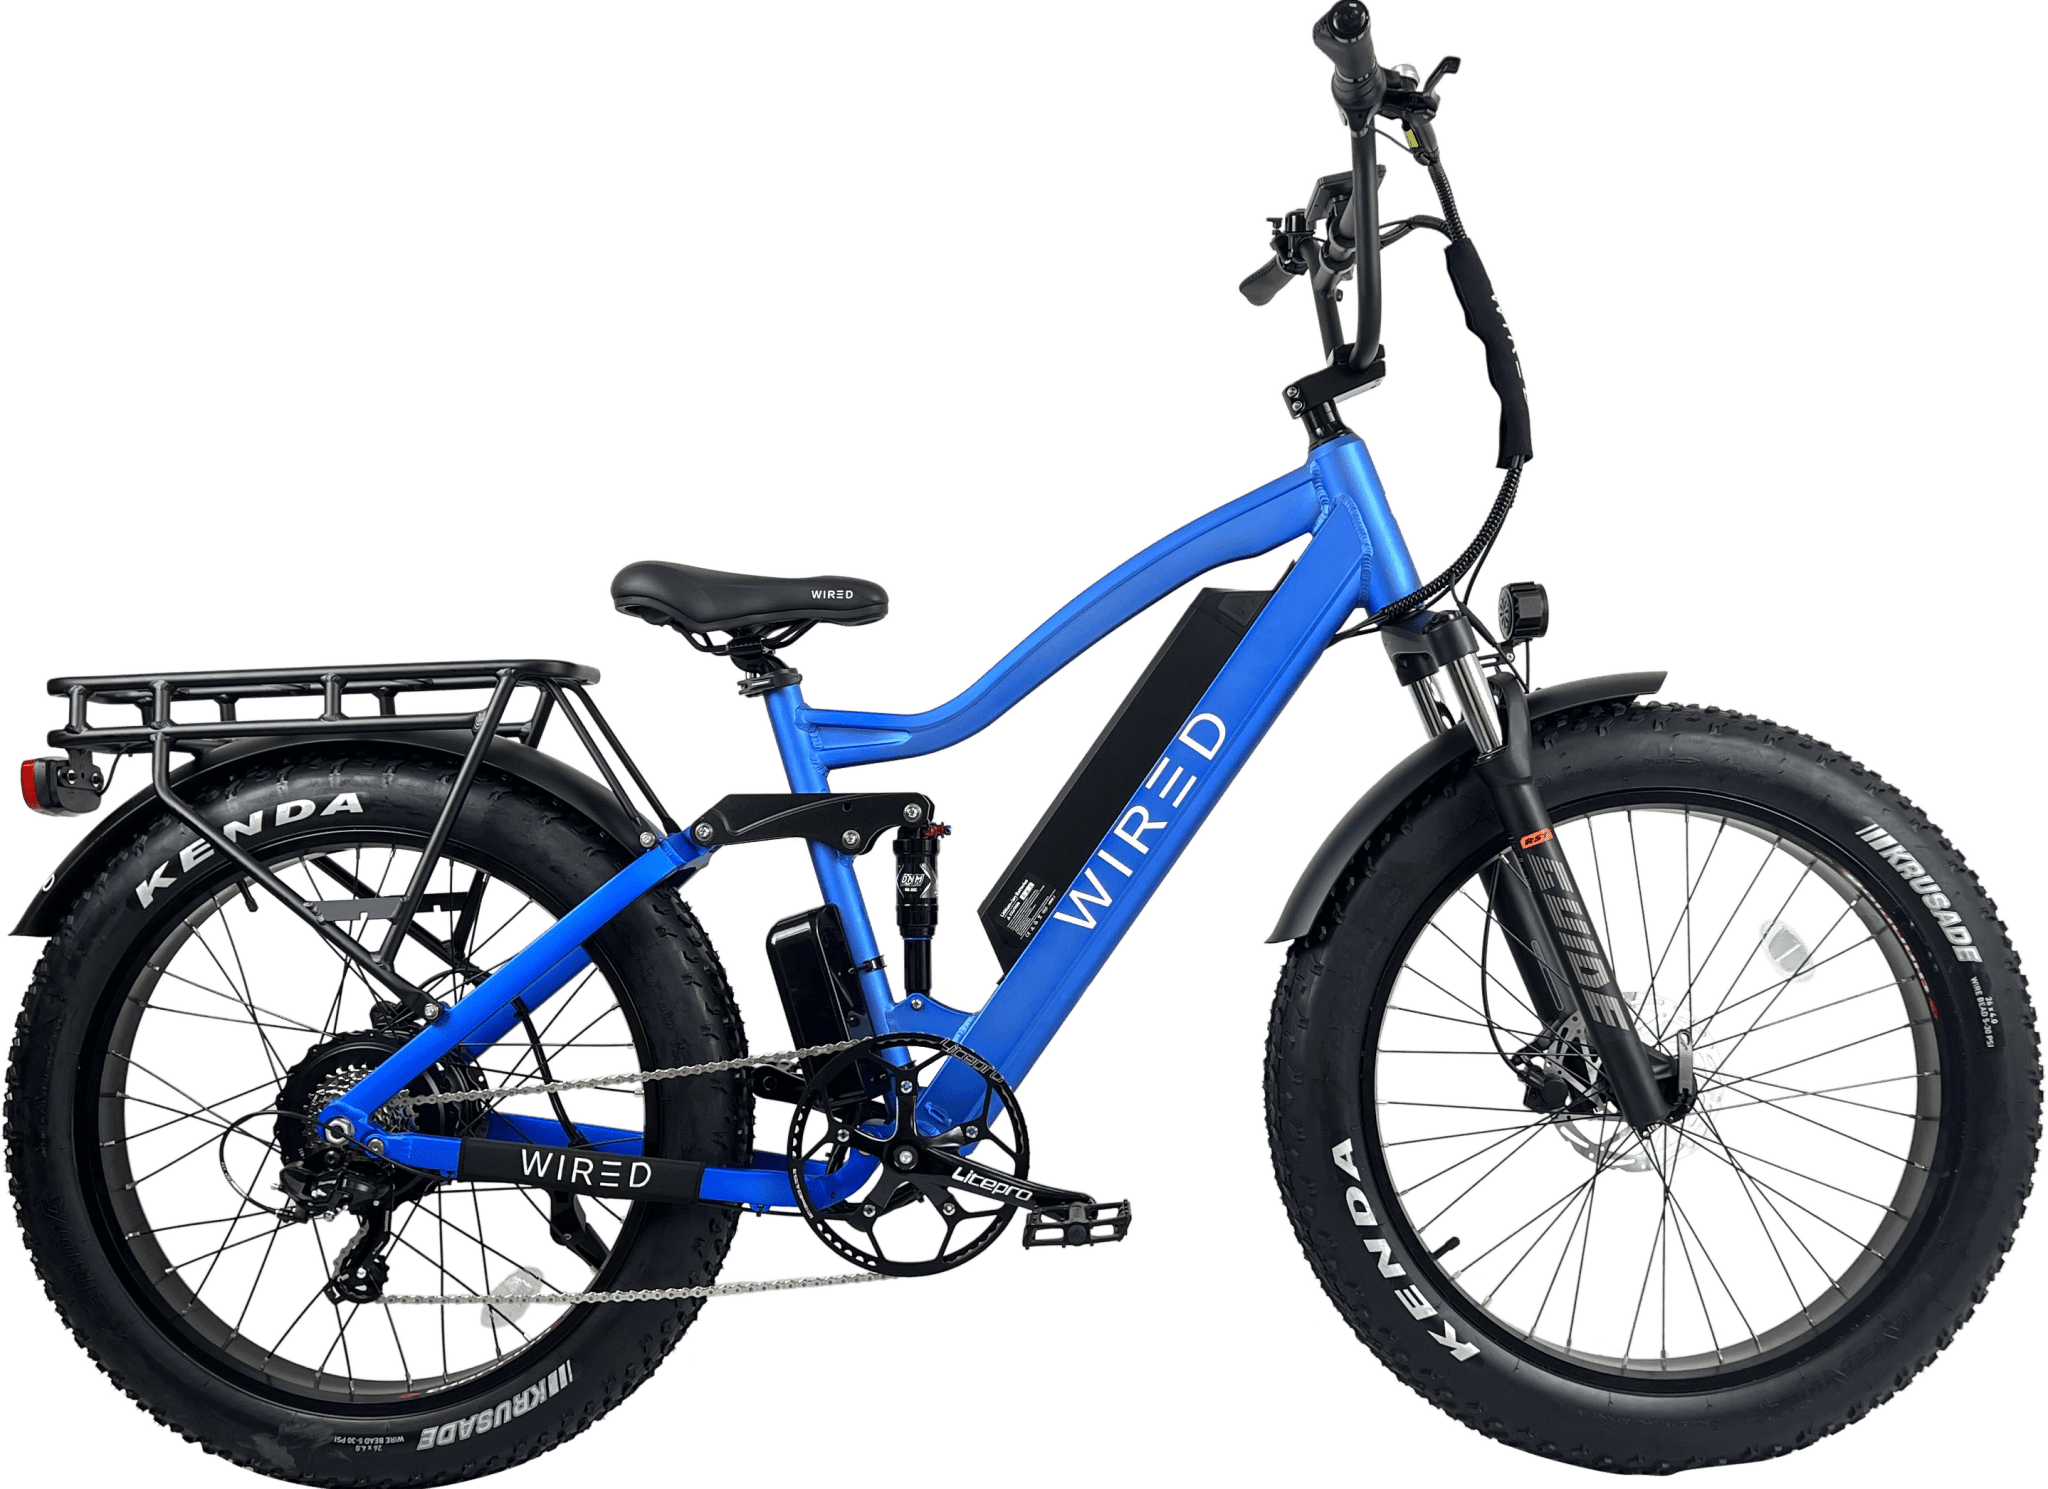 Why I Think Buying an E-Bike Online Is a Really Bad Idea